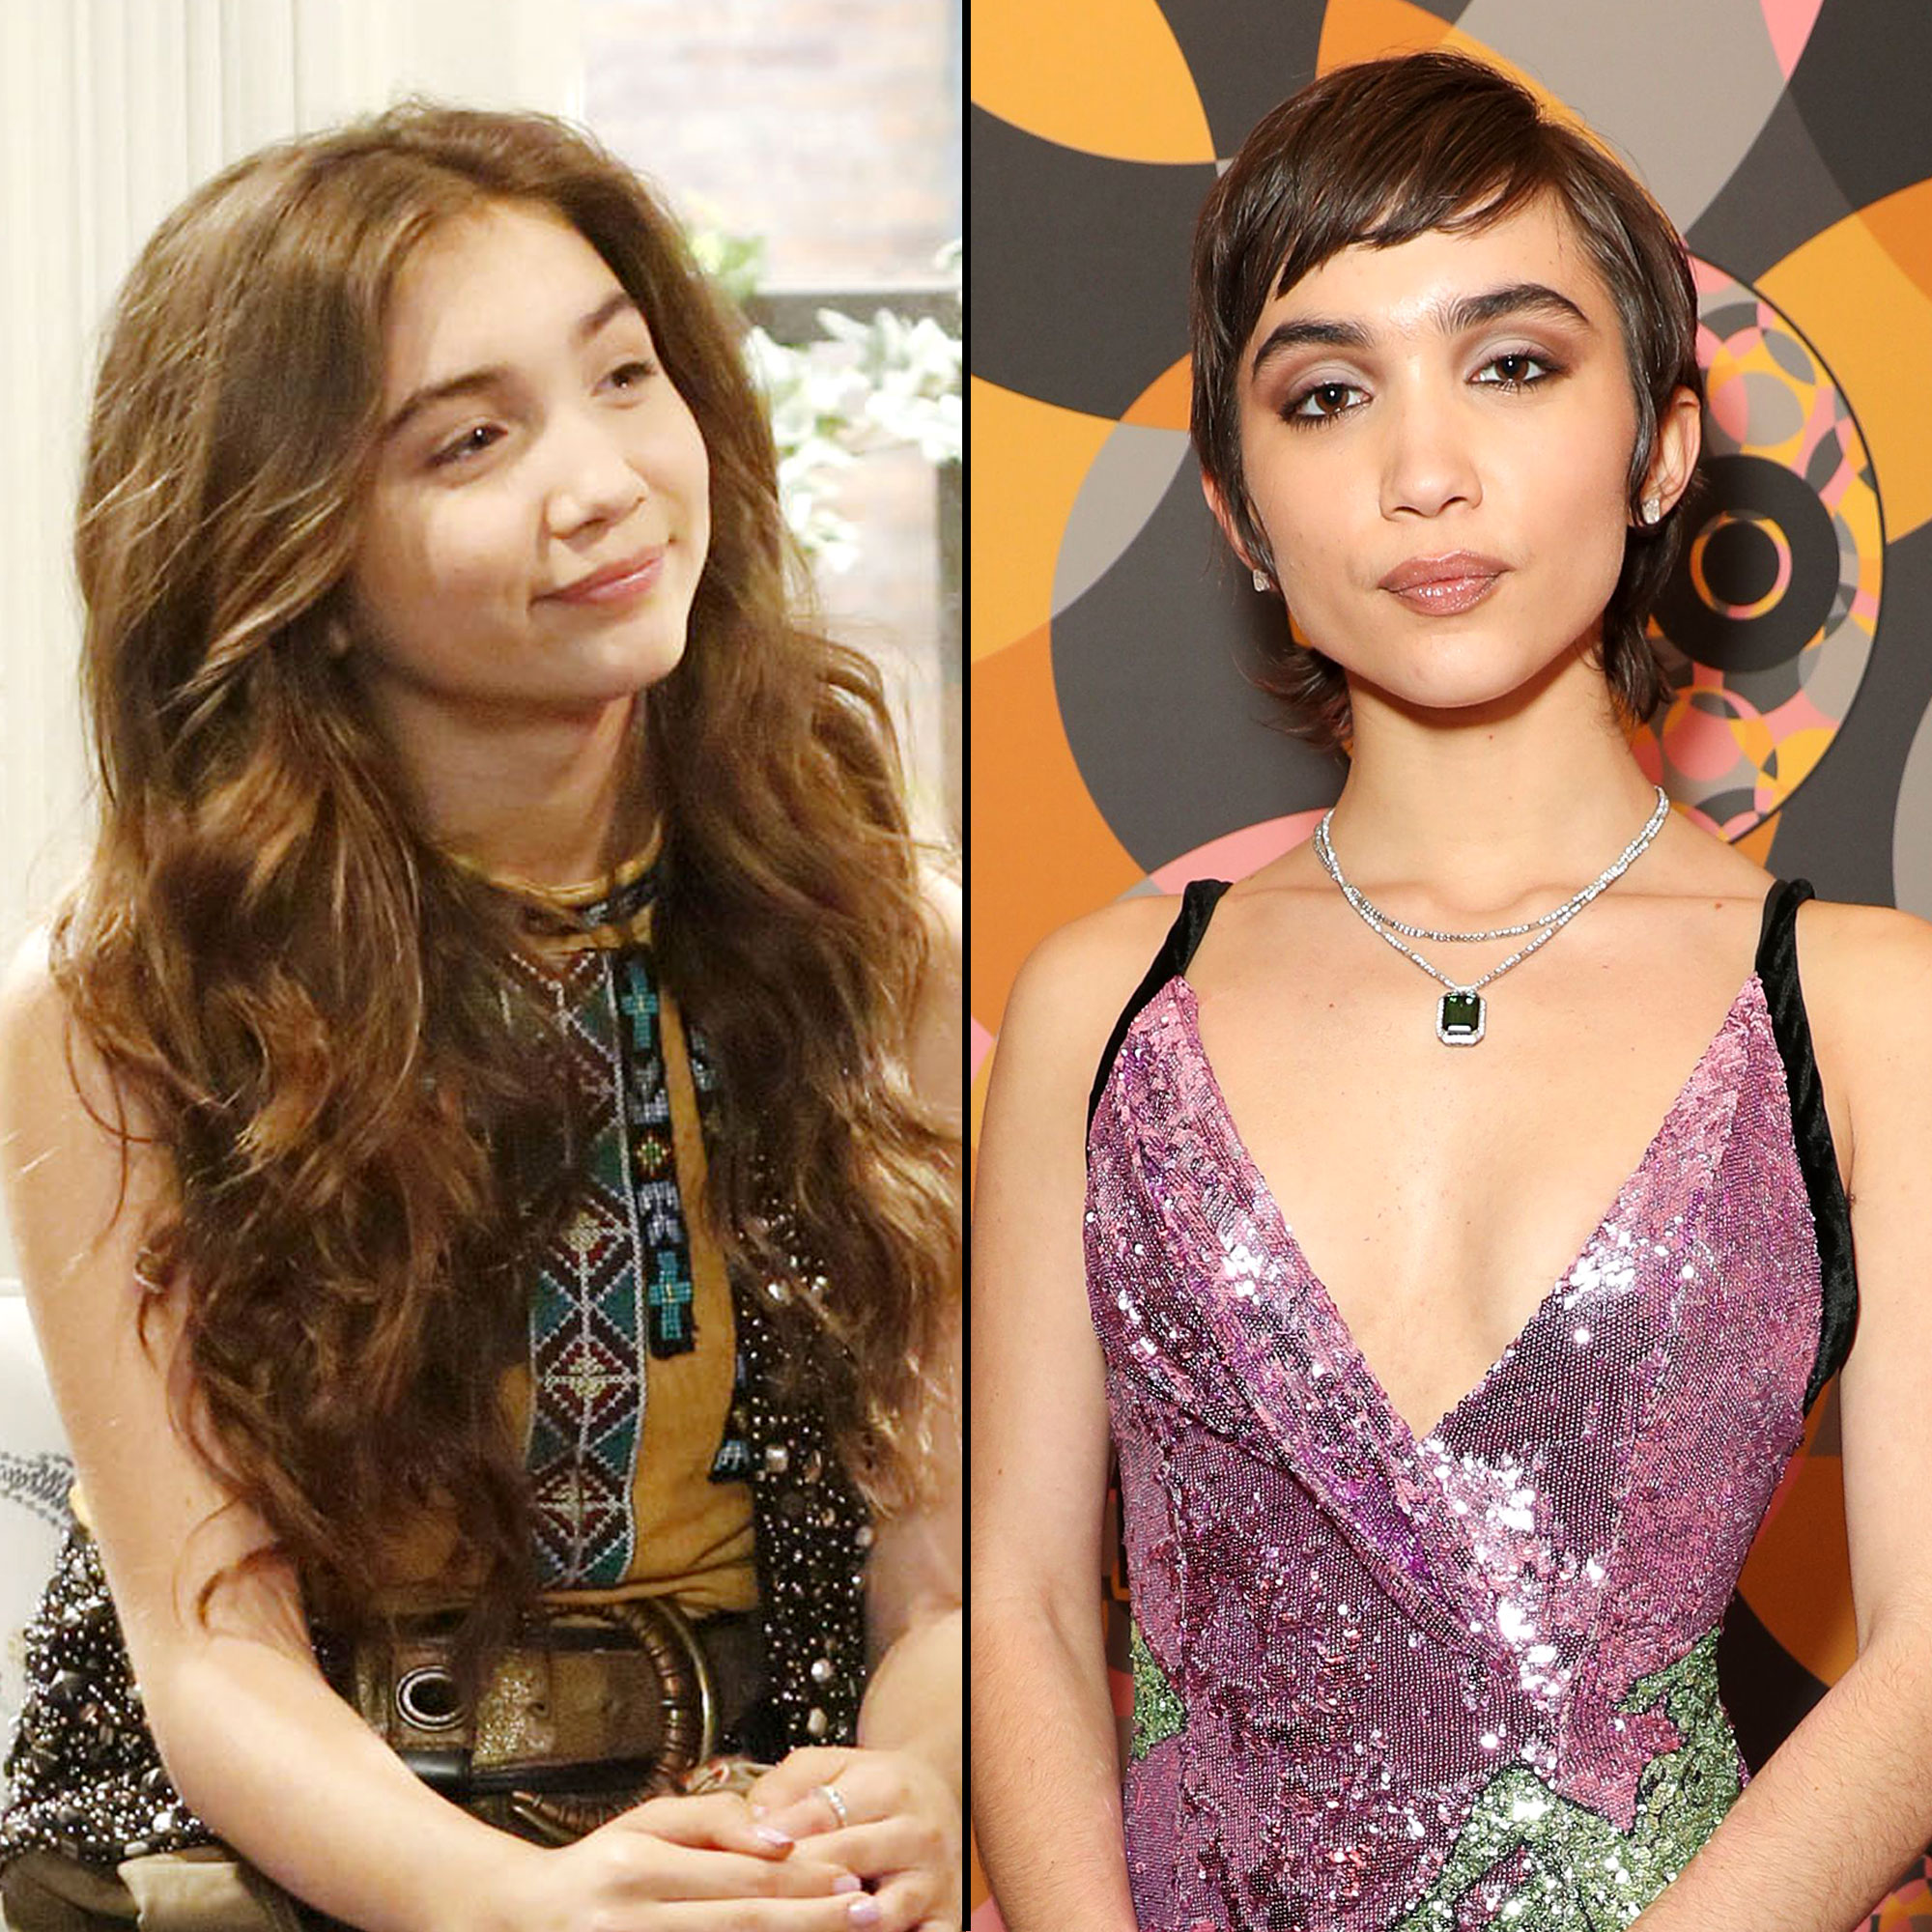 Disney Porn Rowan Blanchard - Disney Channel Stars Then and Now: Photos of Child Stars Today